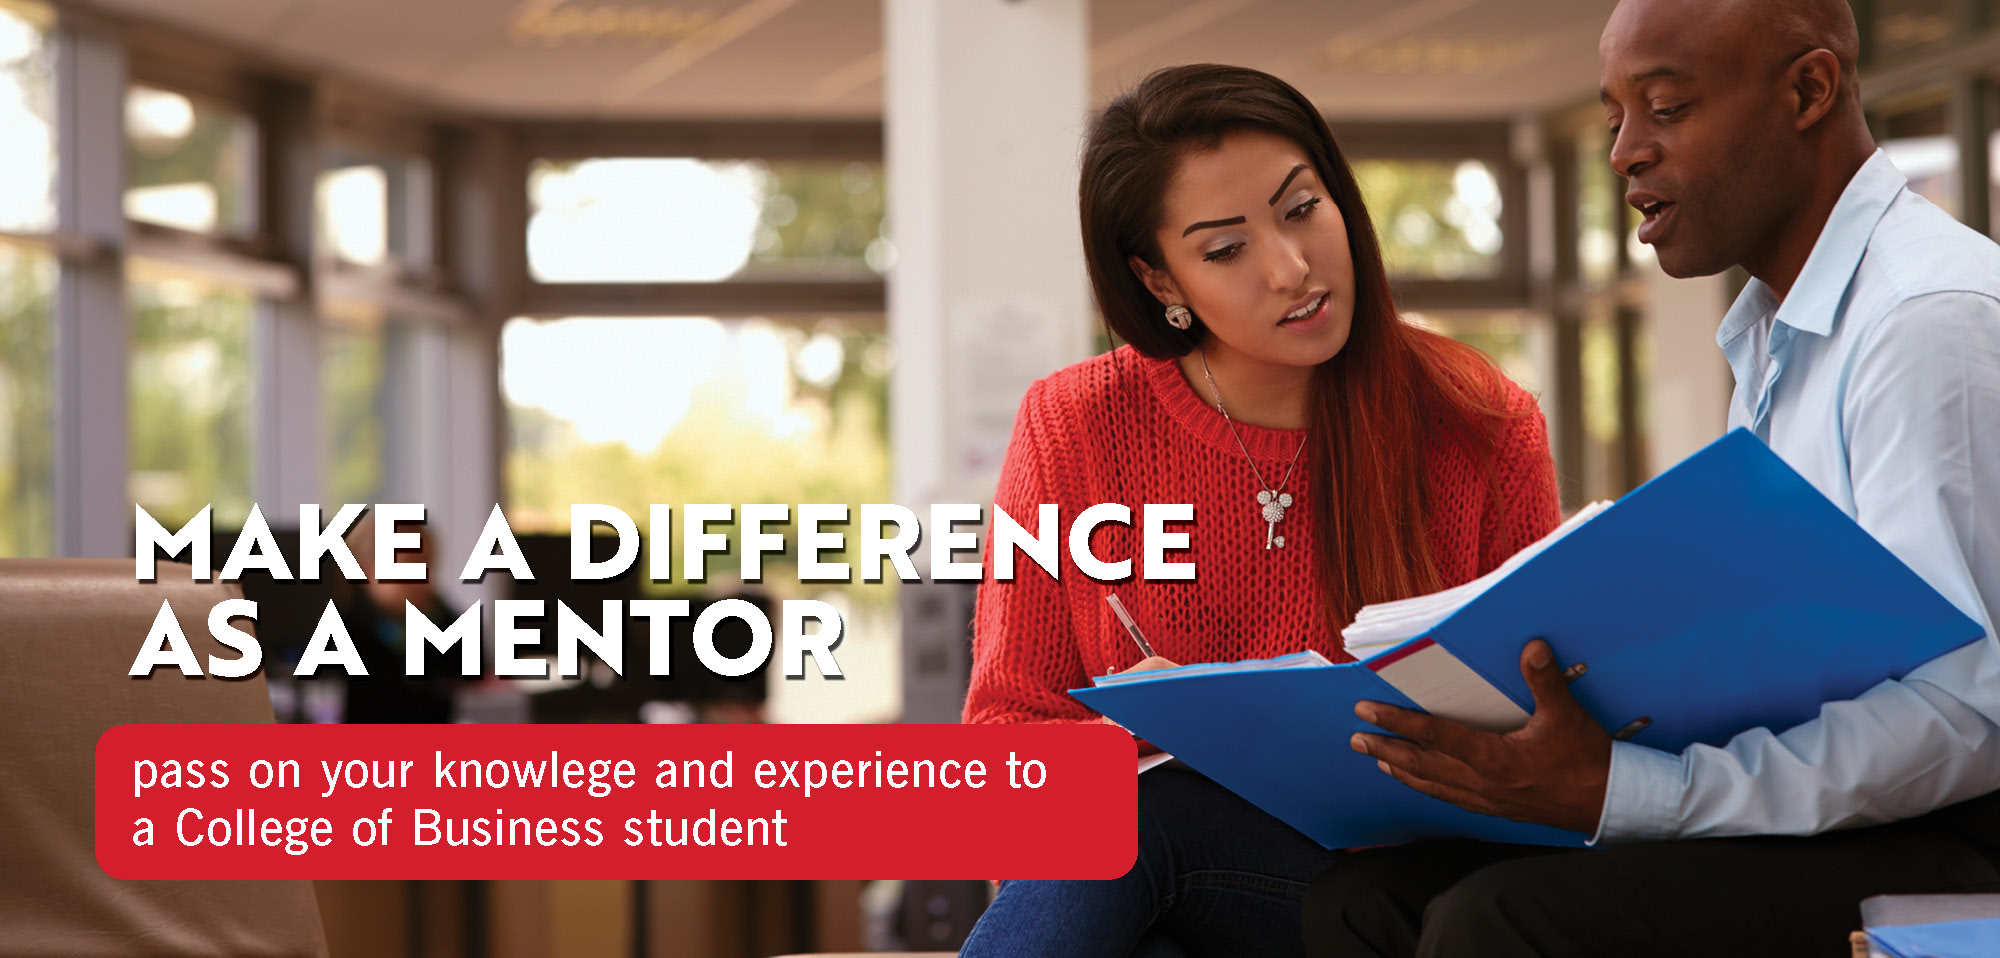 Make a difference as a Mentor